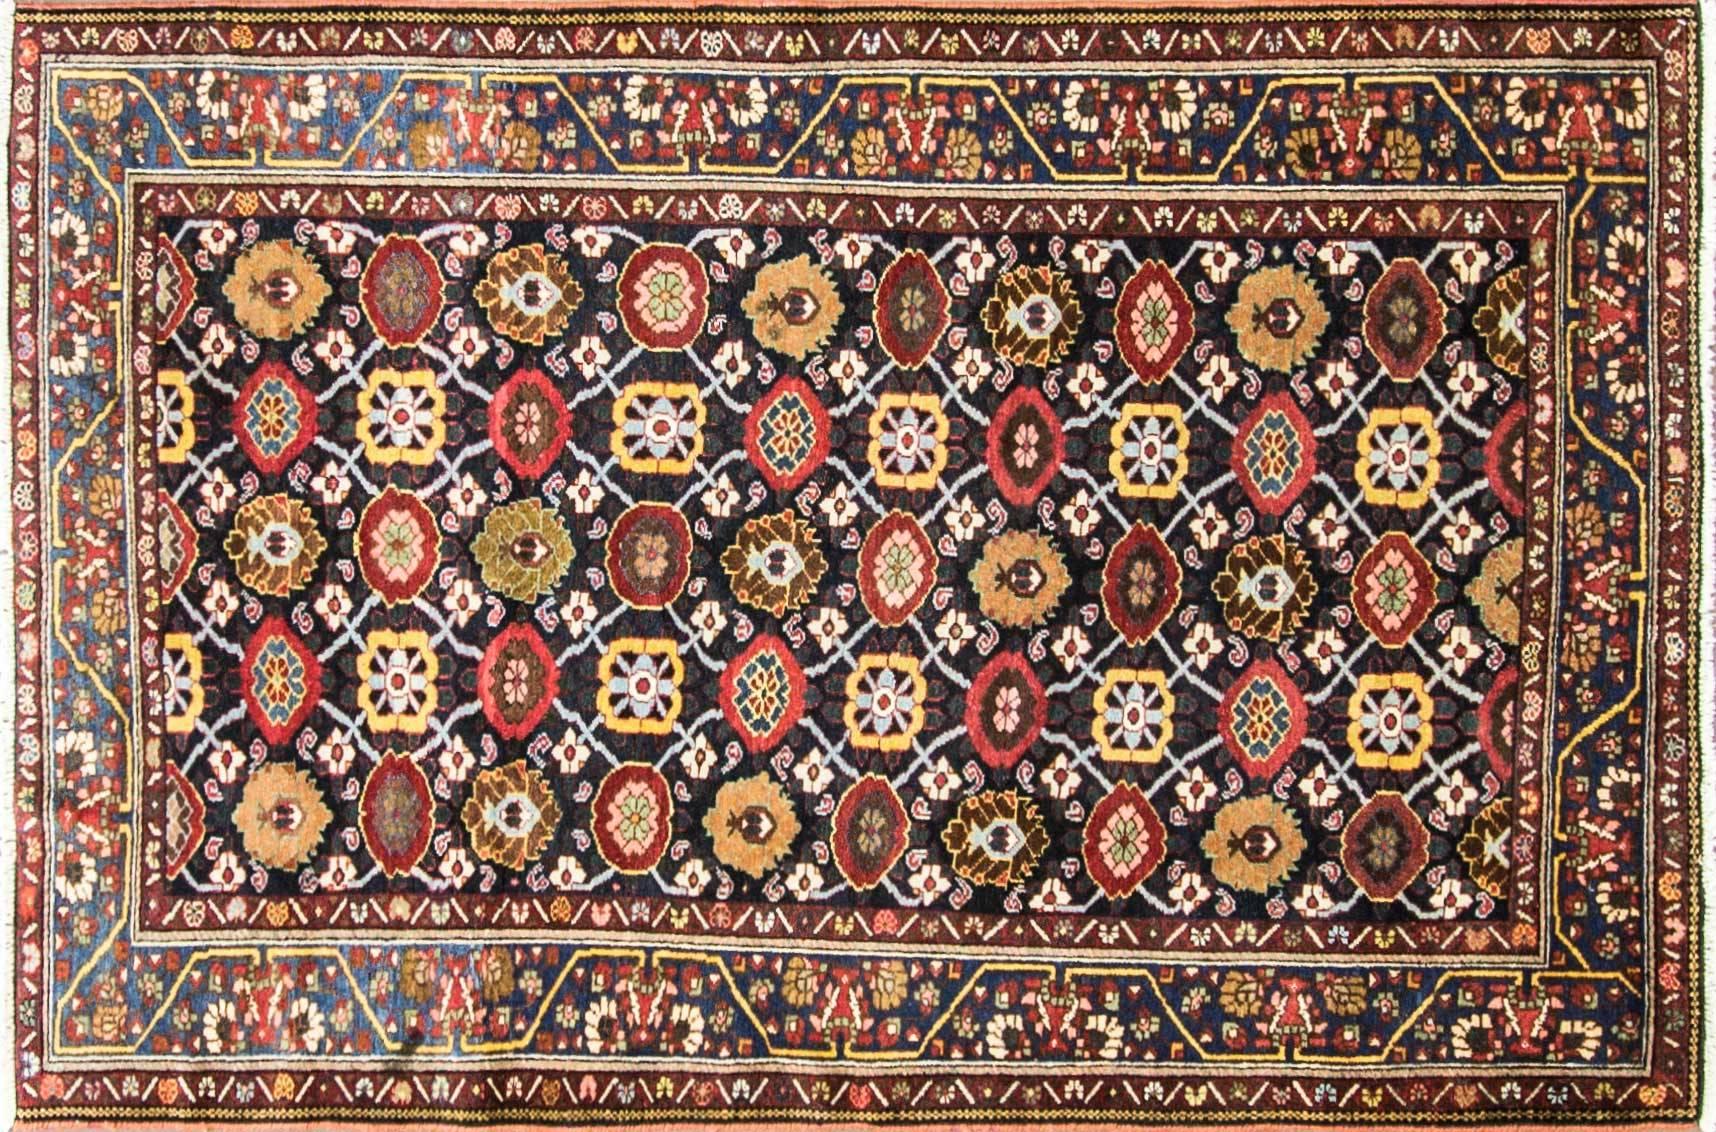 Many Persian Bakhtiari rugs are in fact tribal pieces that rely upon a repertoire of abstract geometric and animal motives. But Bakhtiari weavers are also acclaimed for their ability to produce sophisticated medallion all-over, and garden designs of